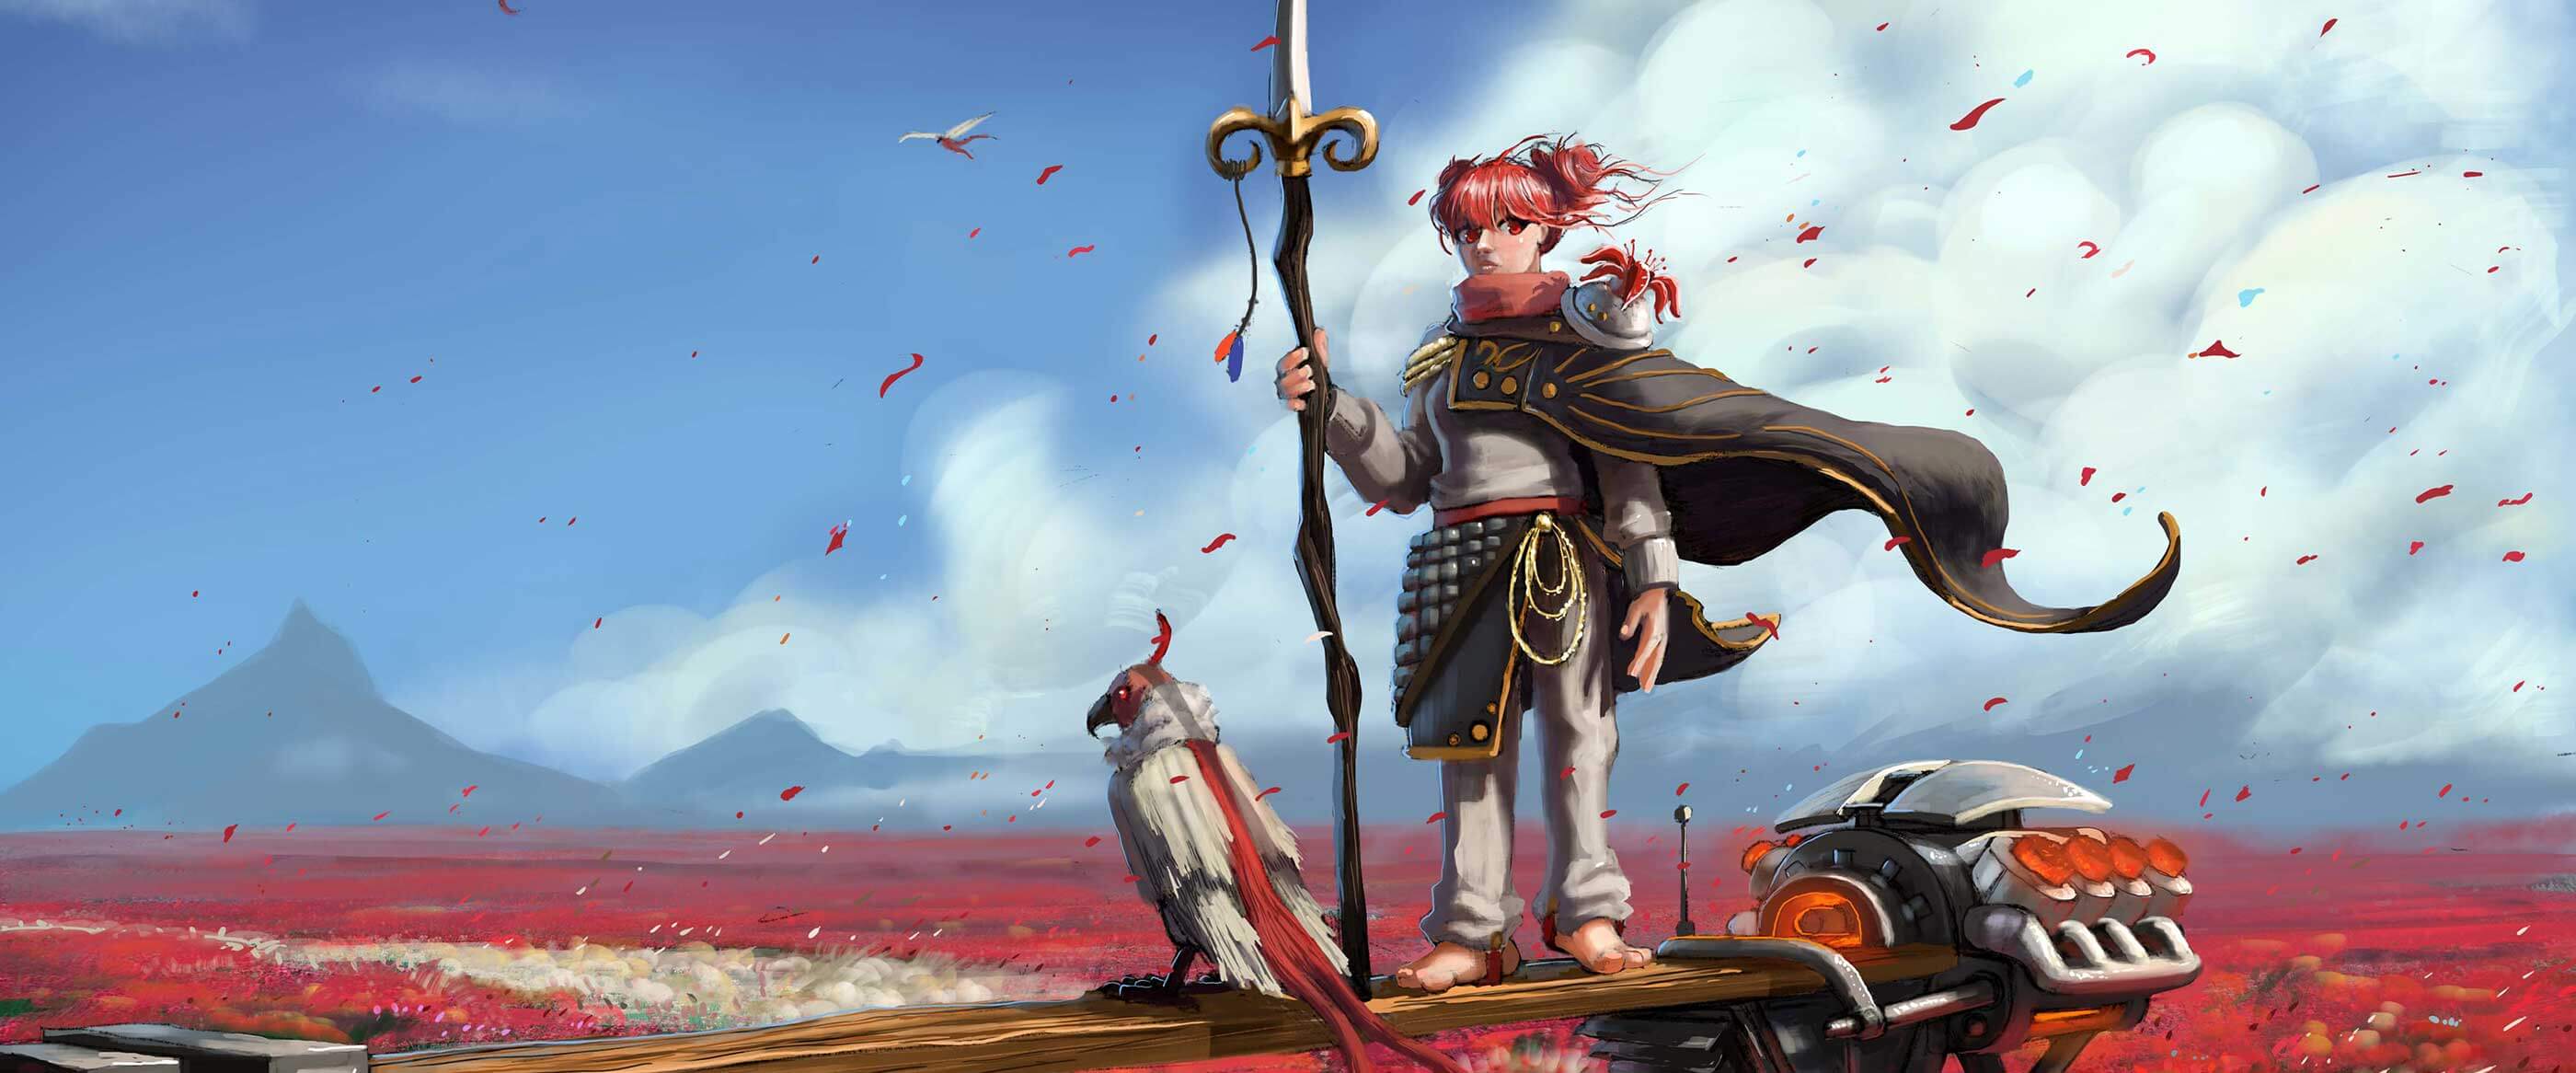 A falcon and a fantasy-style caped woman with a spear stand in a windswept red landscape.